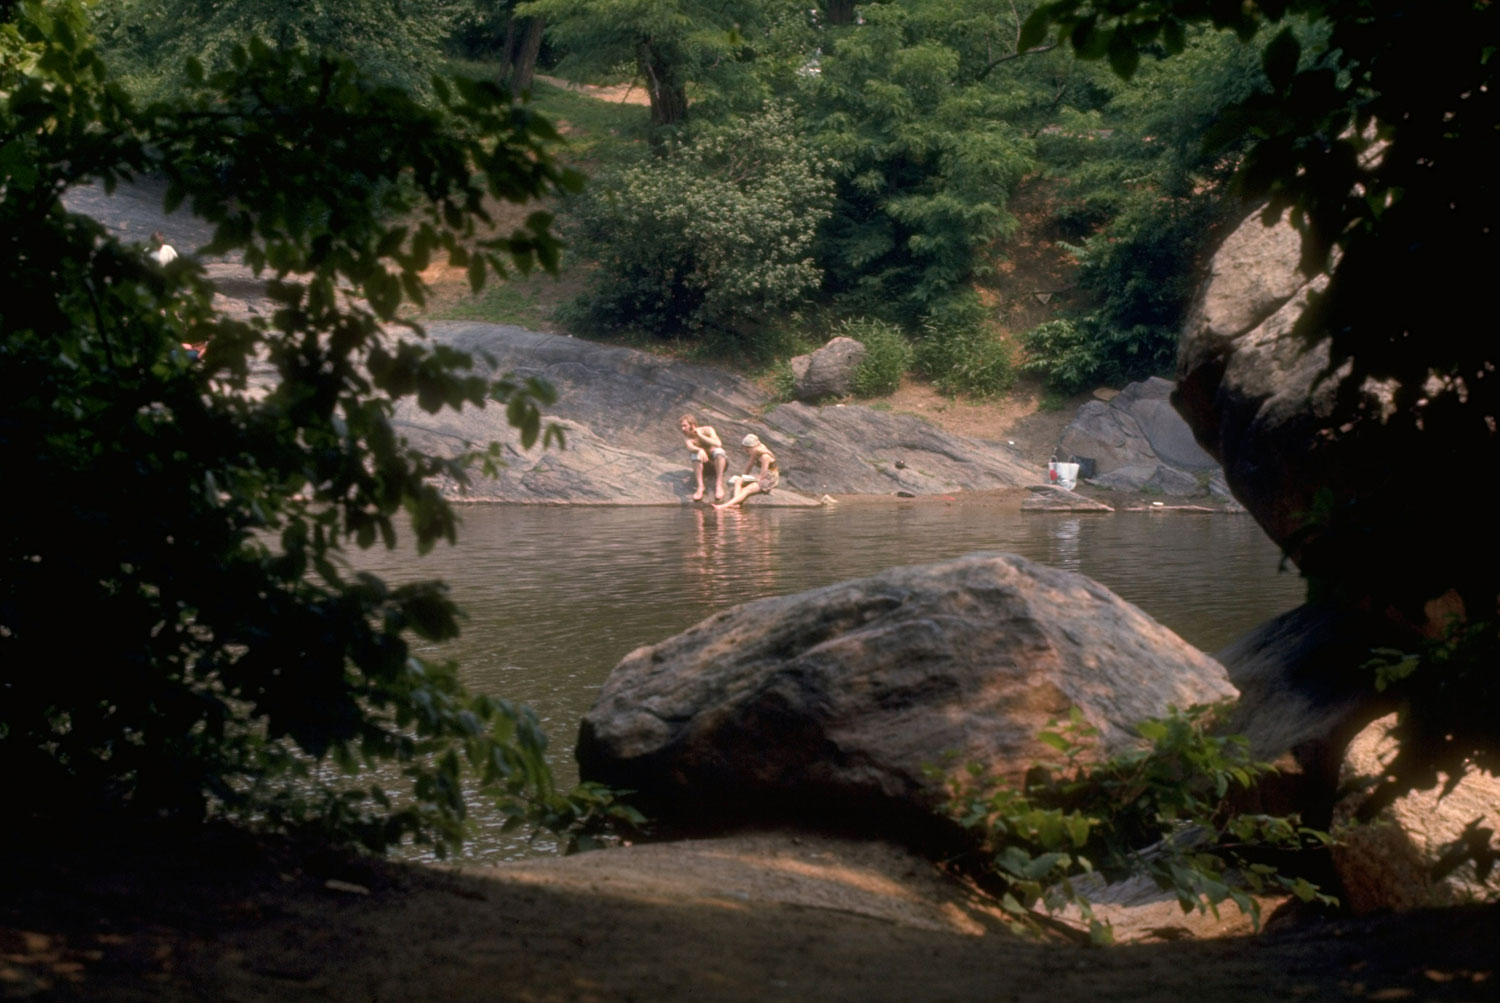 People relaxing on rocks in Central Park, 1969.